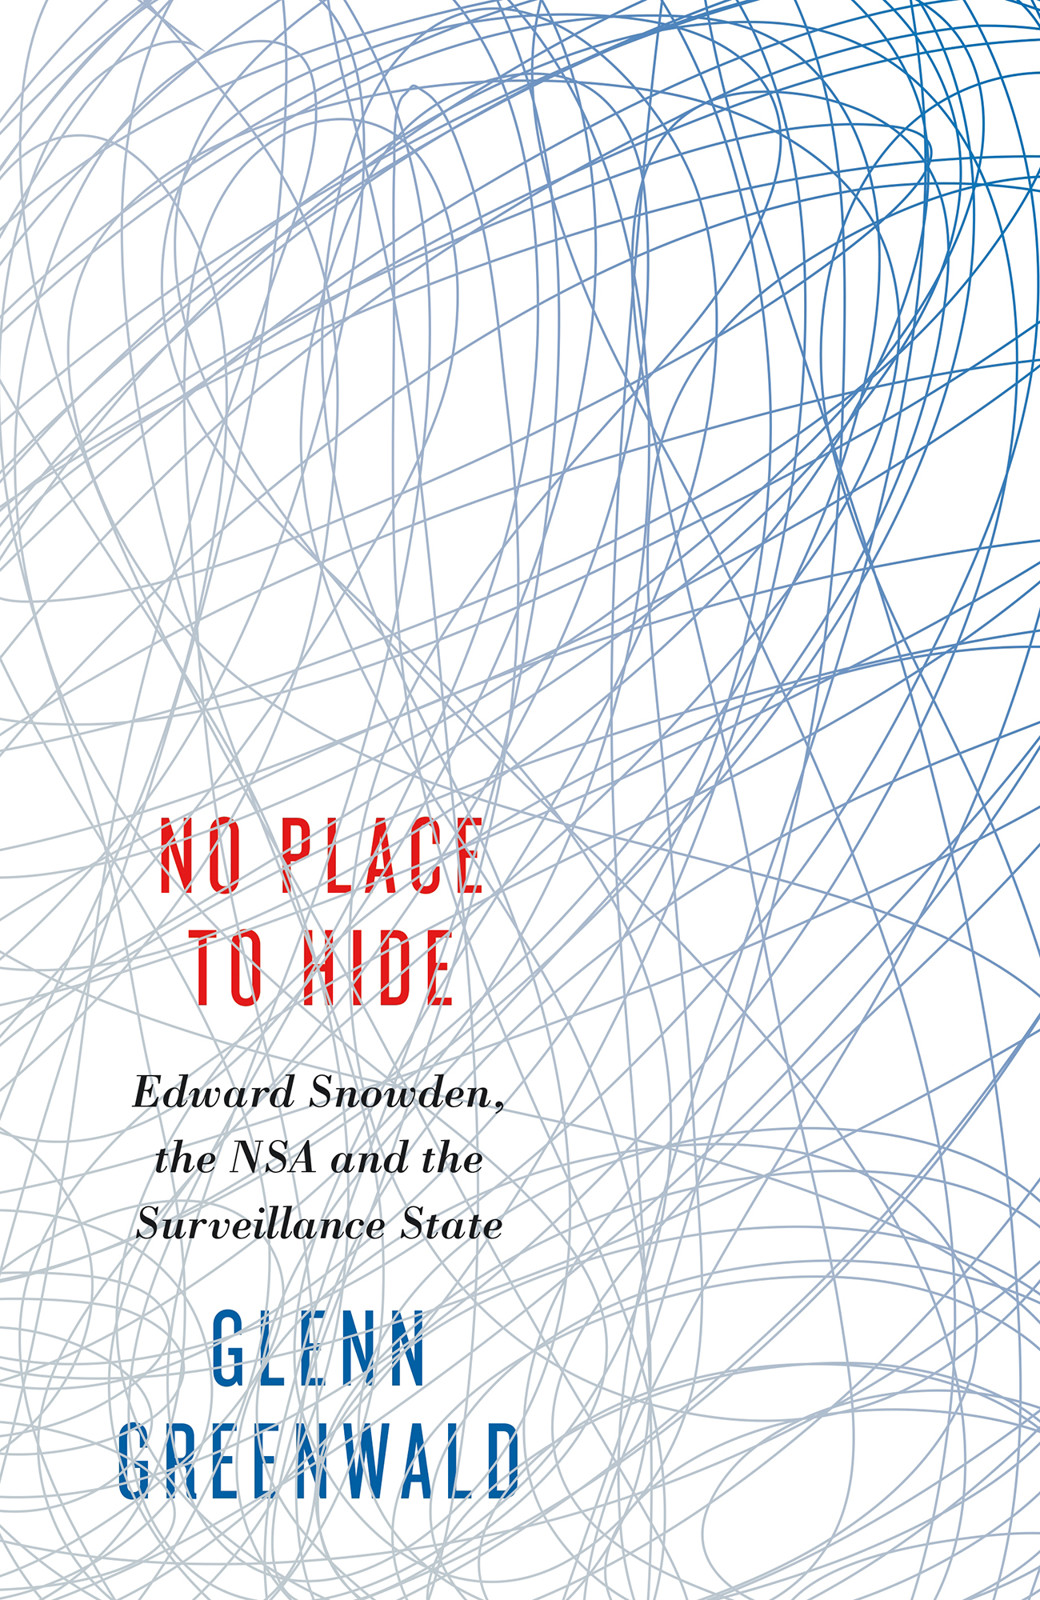 No place to hide Edward Snowden the NSA and the surveillance state - image 1